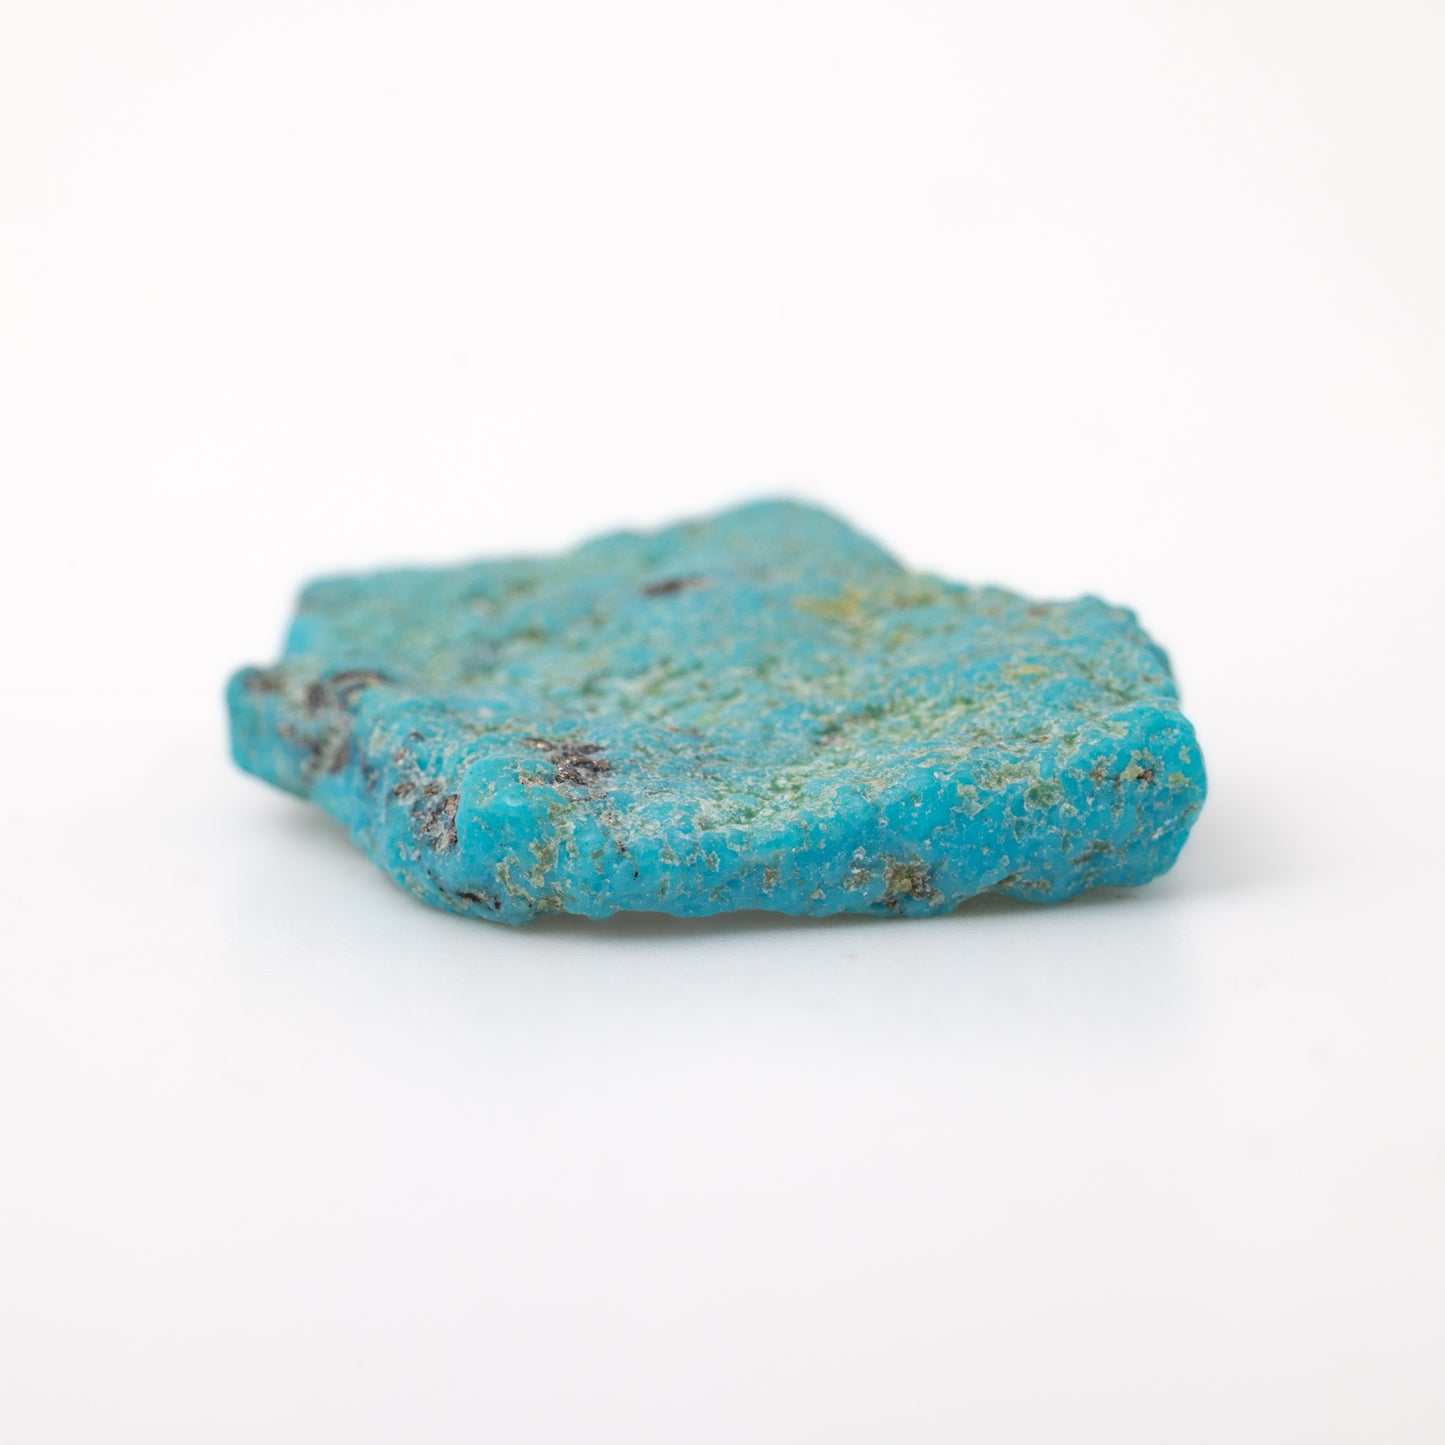 Natural Kingman Turquoise: Speak Your Truth with Heart Connection. Available in various sizes.